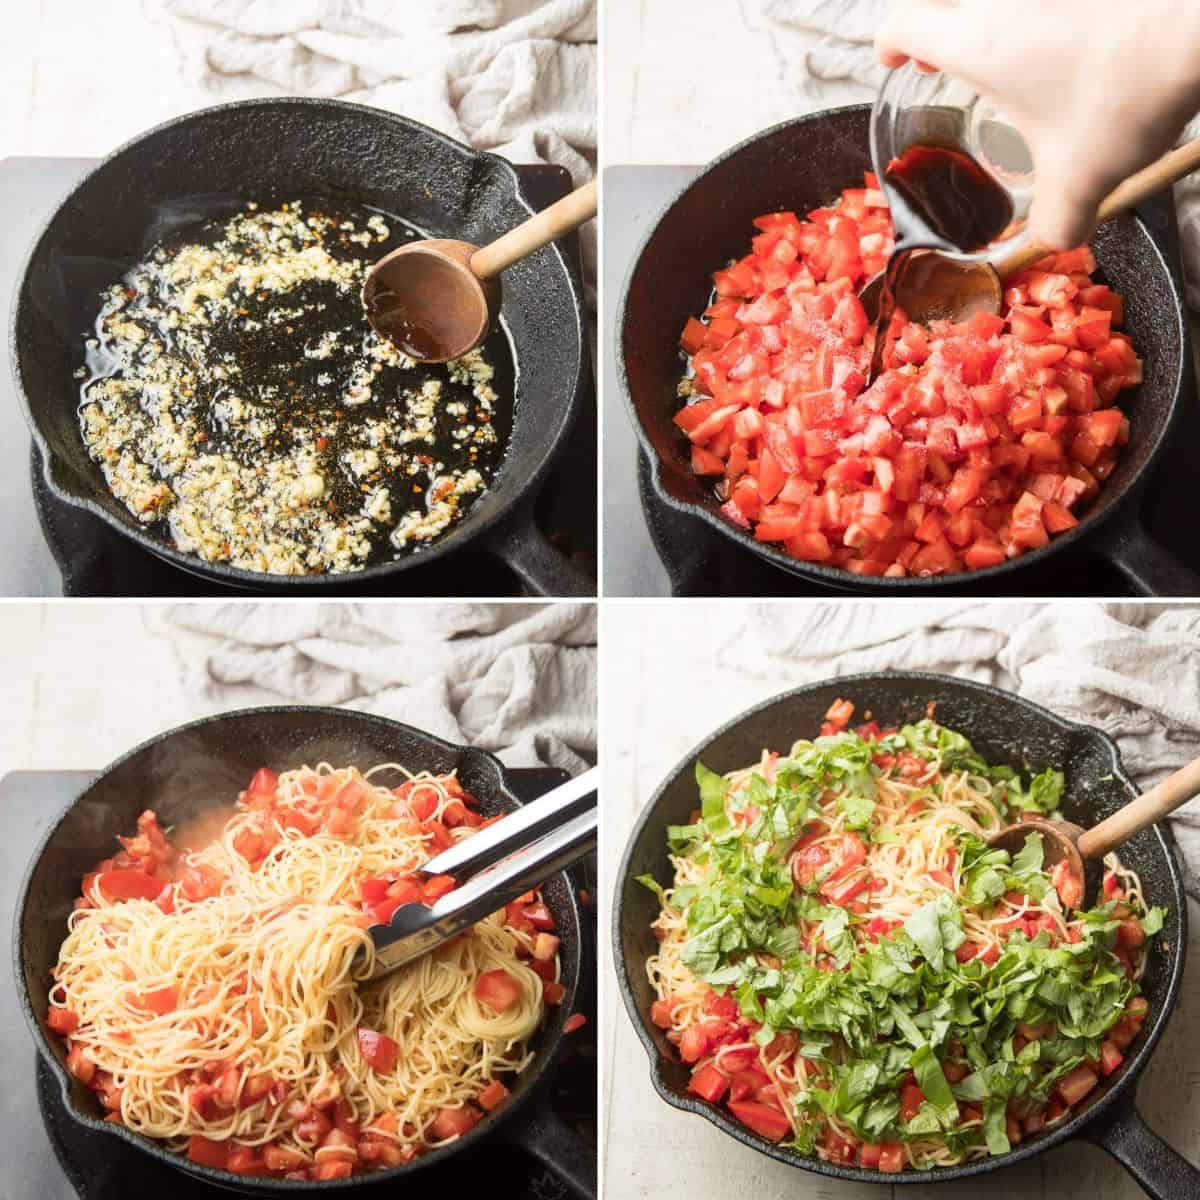 Collage Showing 4 Steps for Making Tomato Basil Pasta